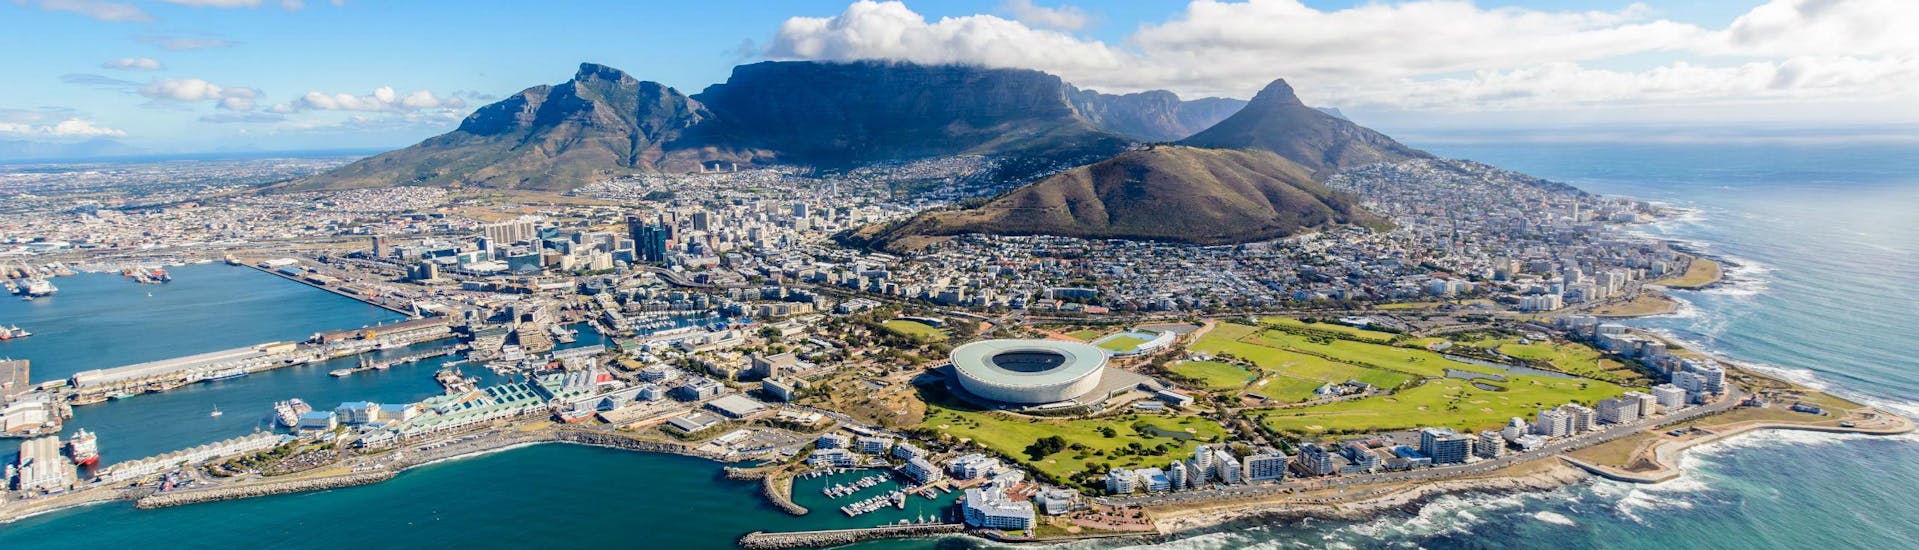 An aereal view of Cape Town, where visitors can go paragliding from Lion's Head.